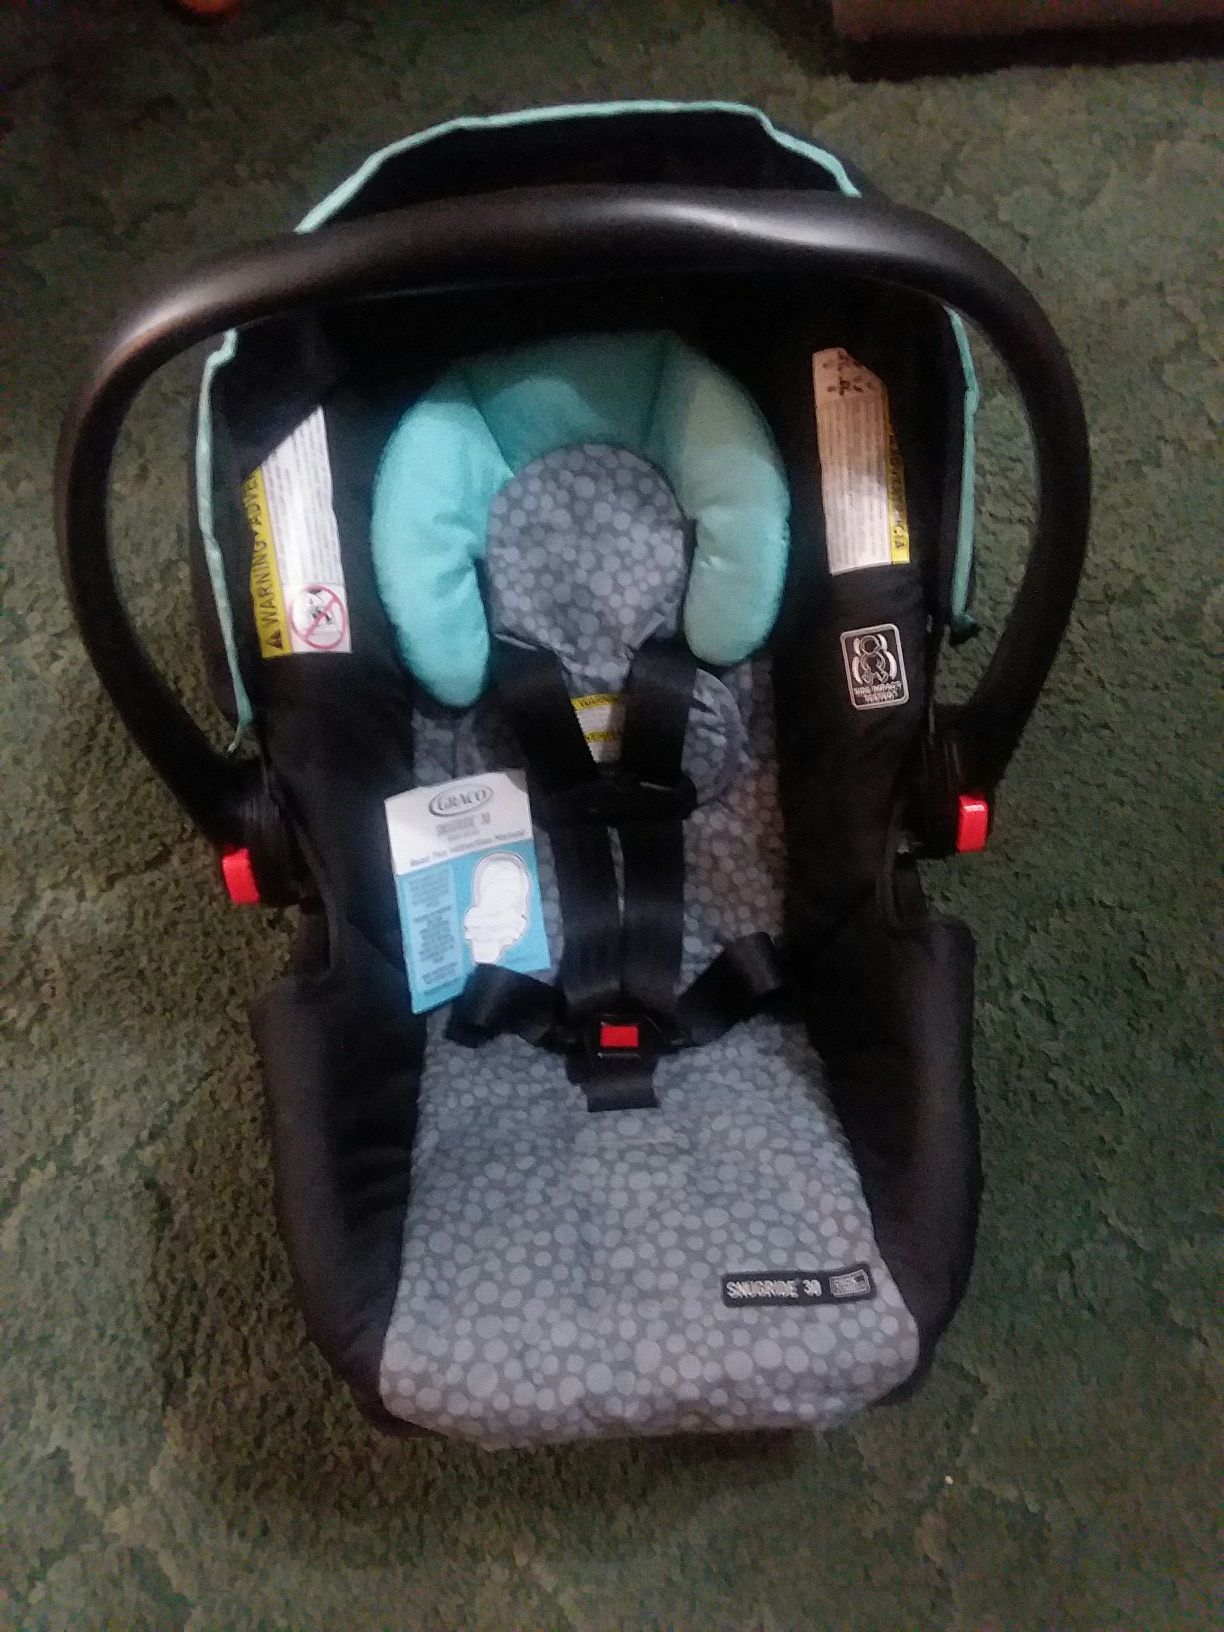 Graco rear facing car seat with base and manual manufactured in 2017